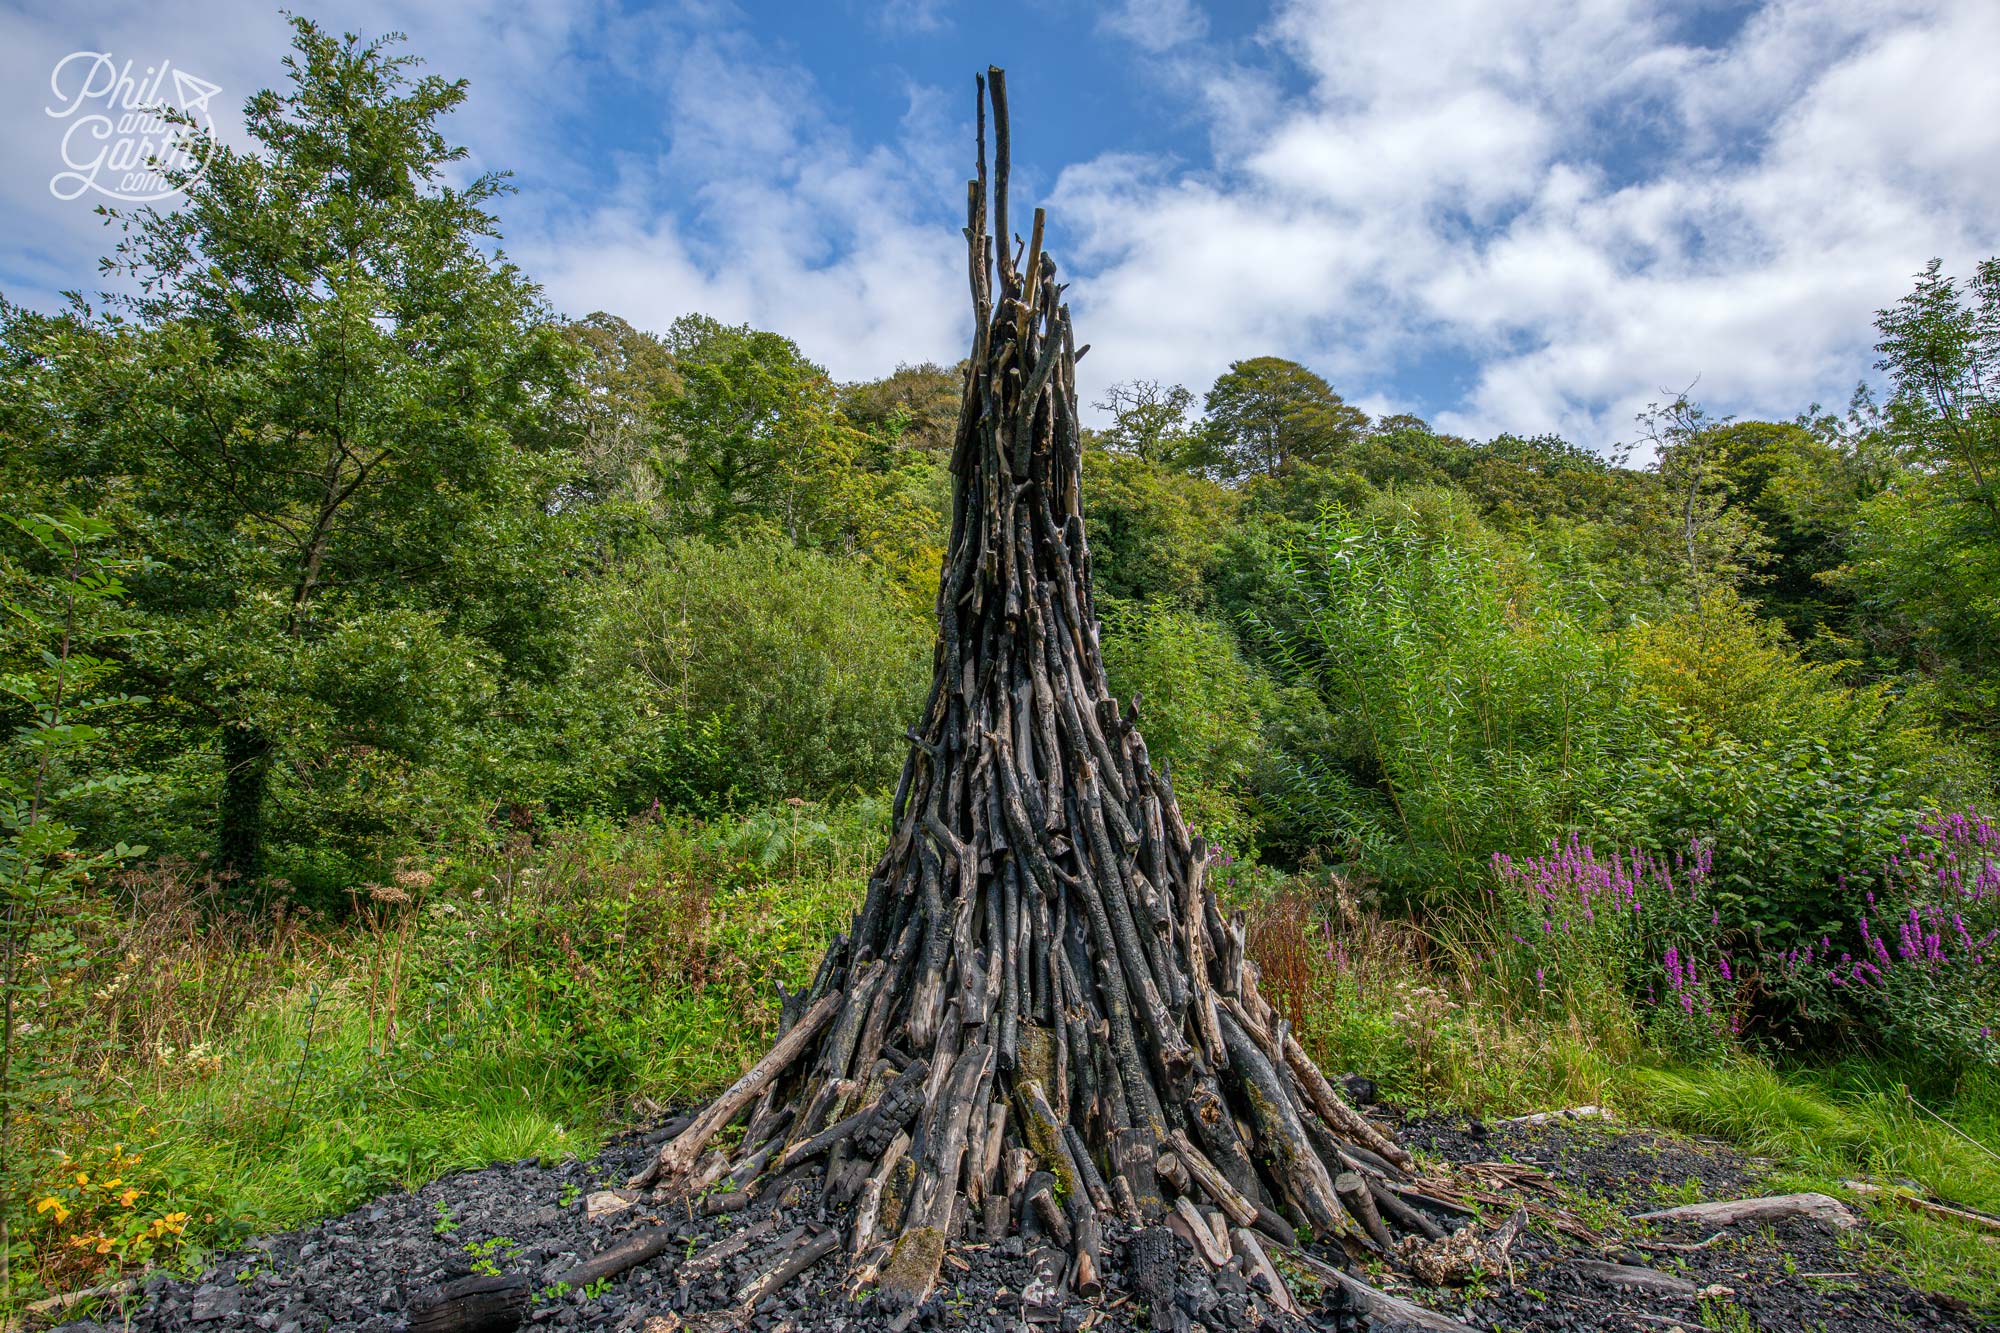 Heligan's charcoal sculpture 'Growth & Decay' by Cornish sculptor James Eddy